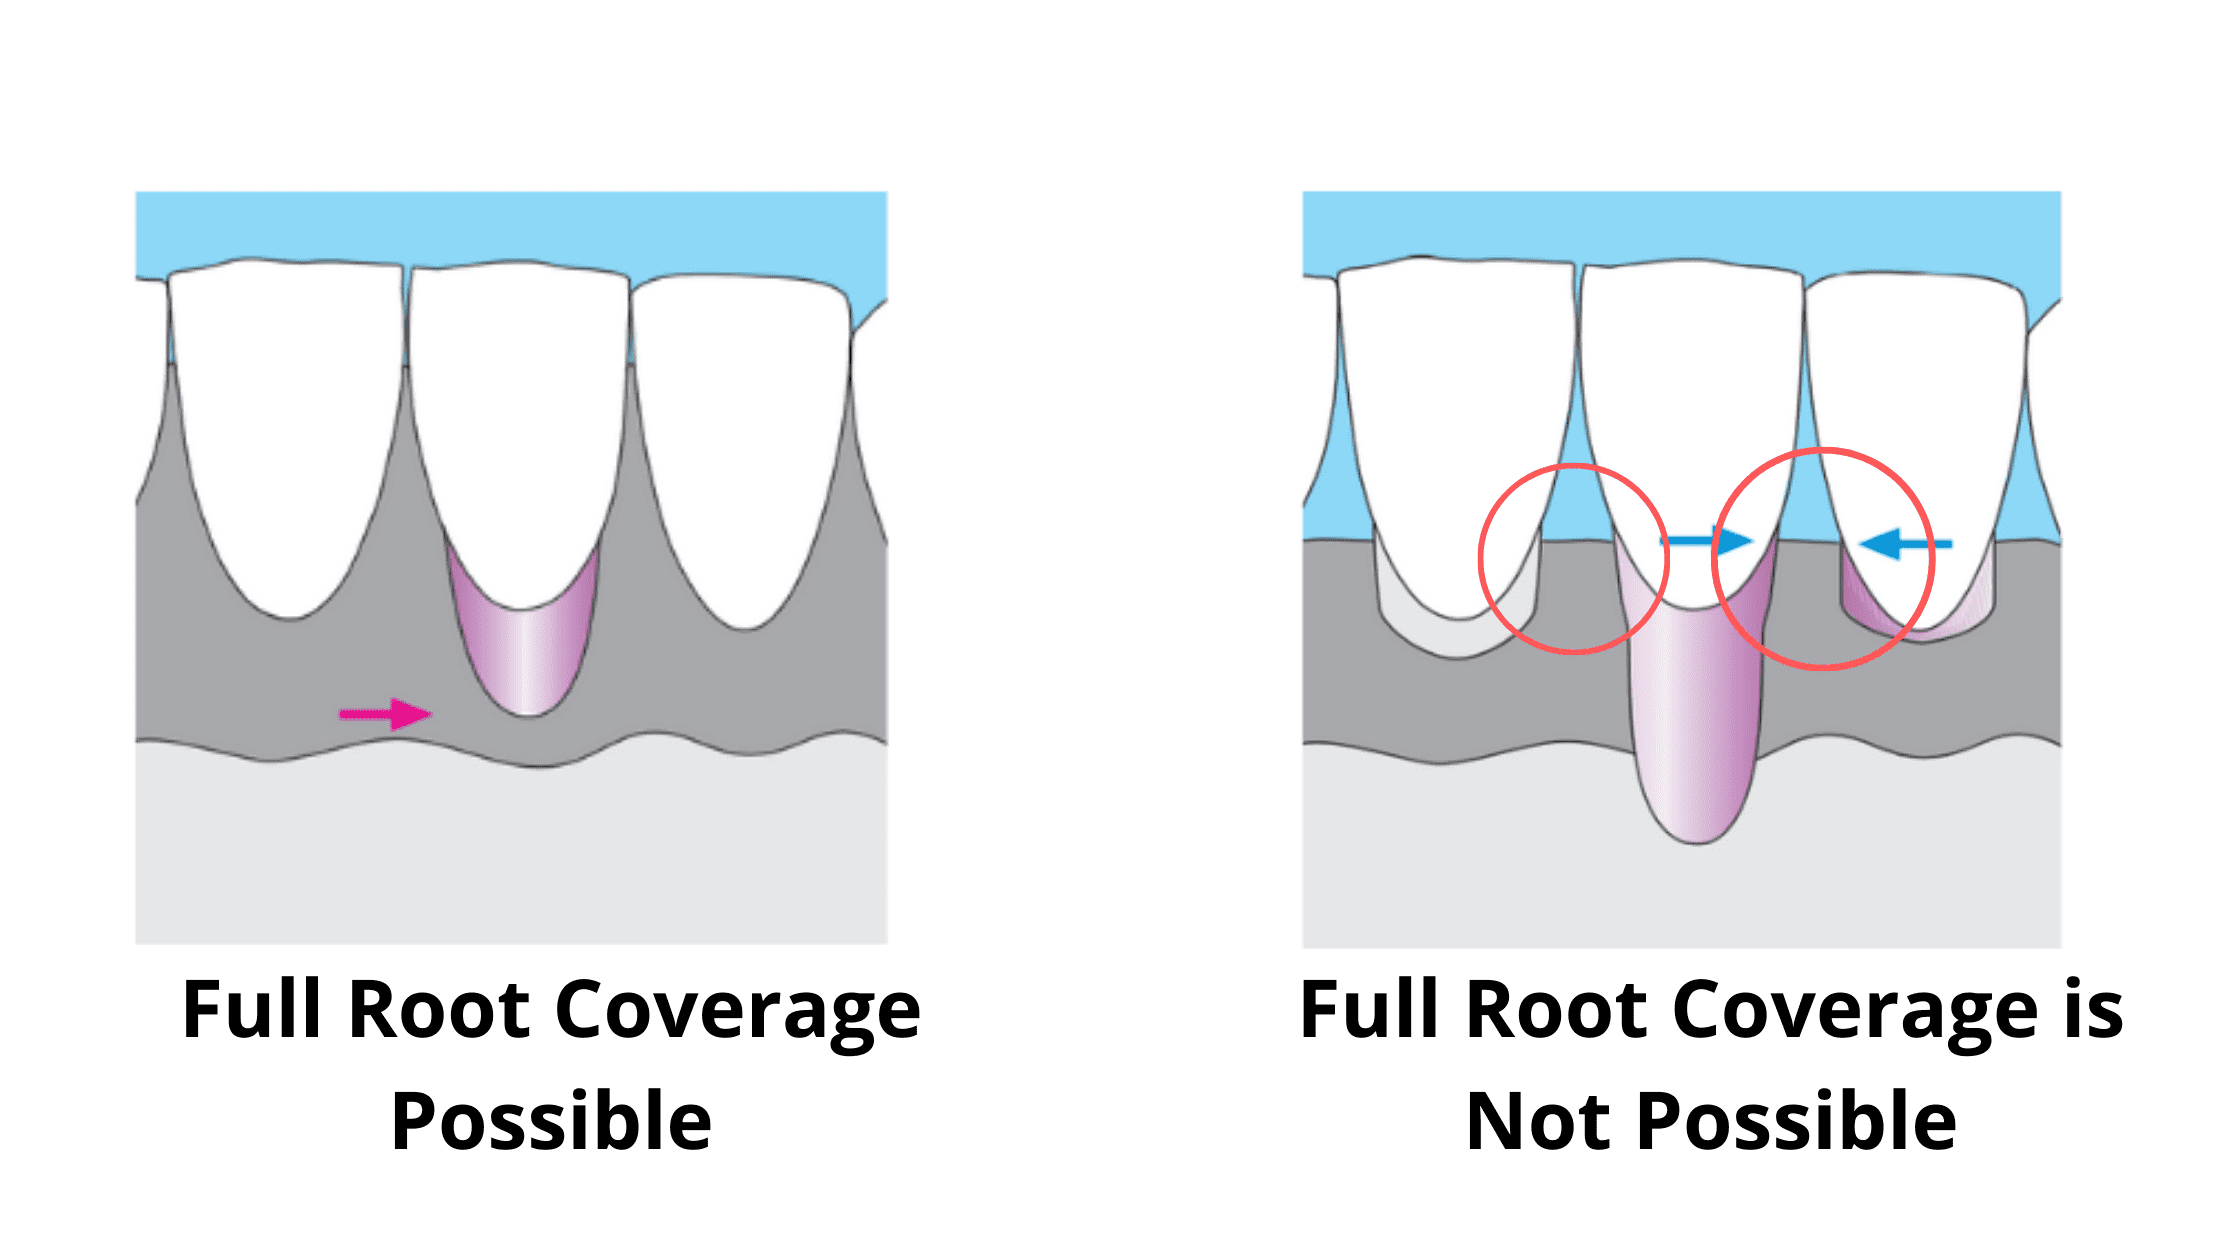 Two figures showing gingival recession. Complete root coverage is possible when the recession does not involve the interdental papillae. However, when the interdental papillae are affected, root coverage is more difficult to achieve.